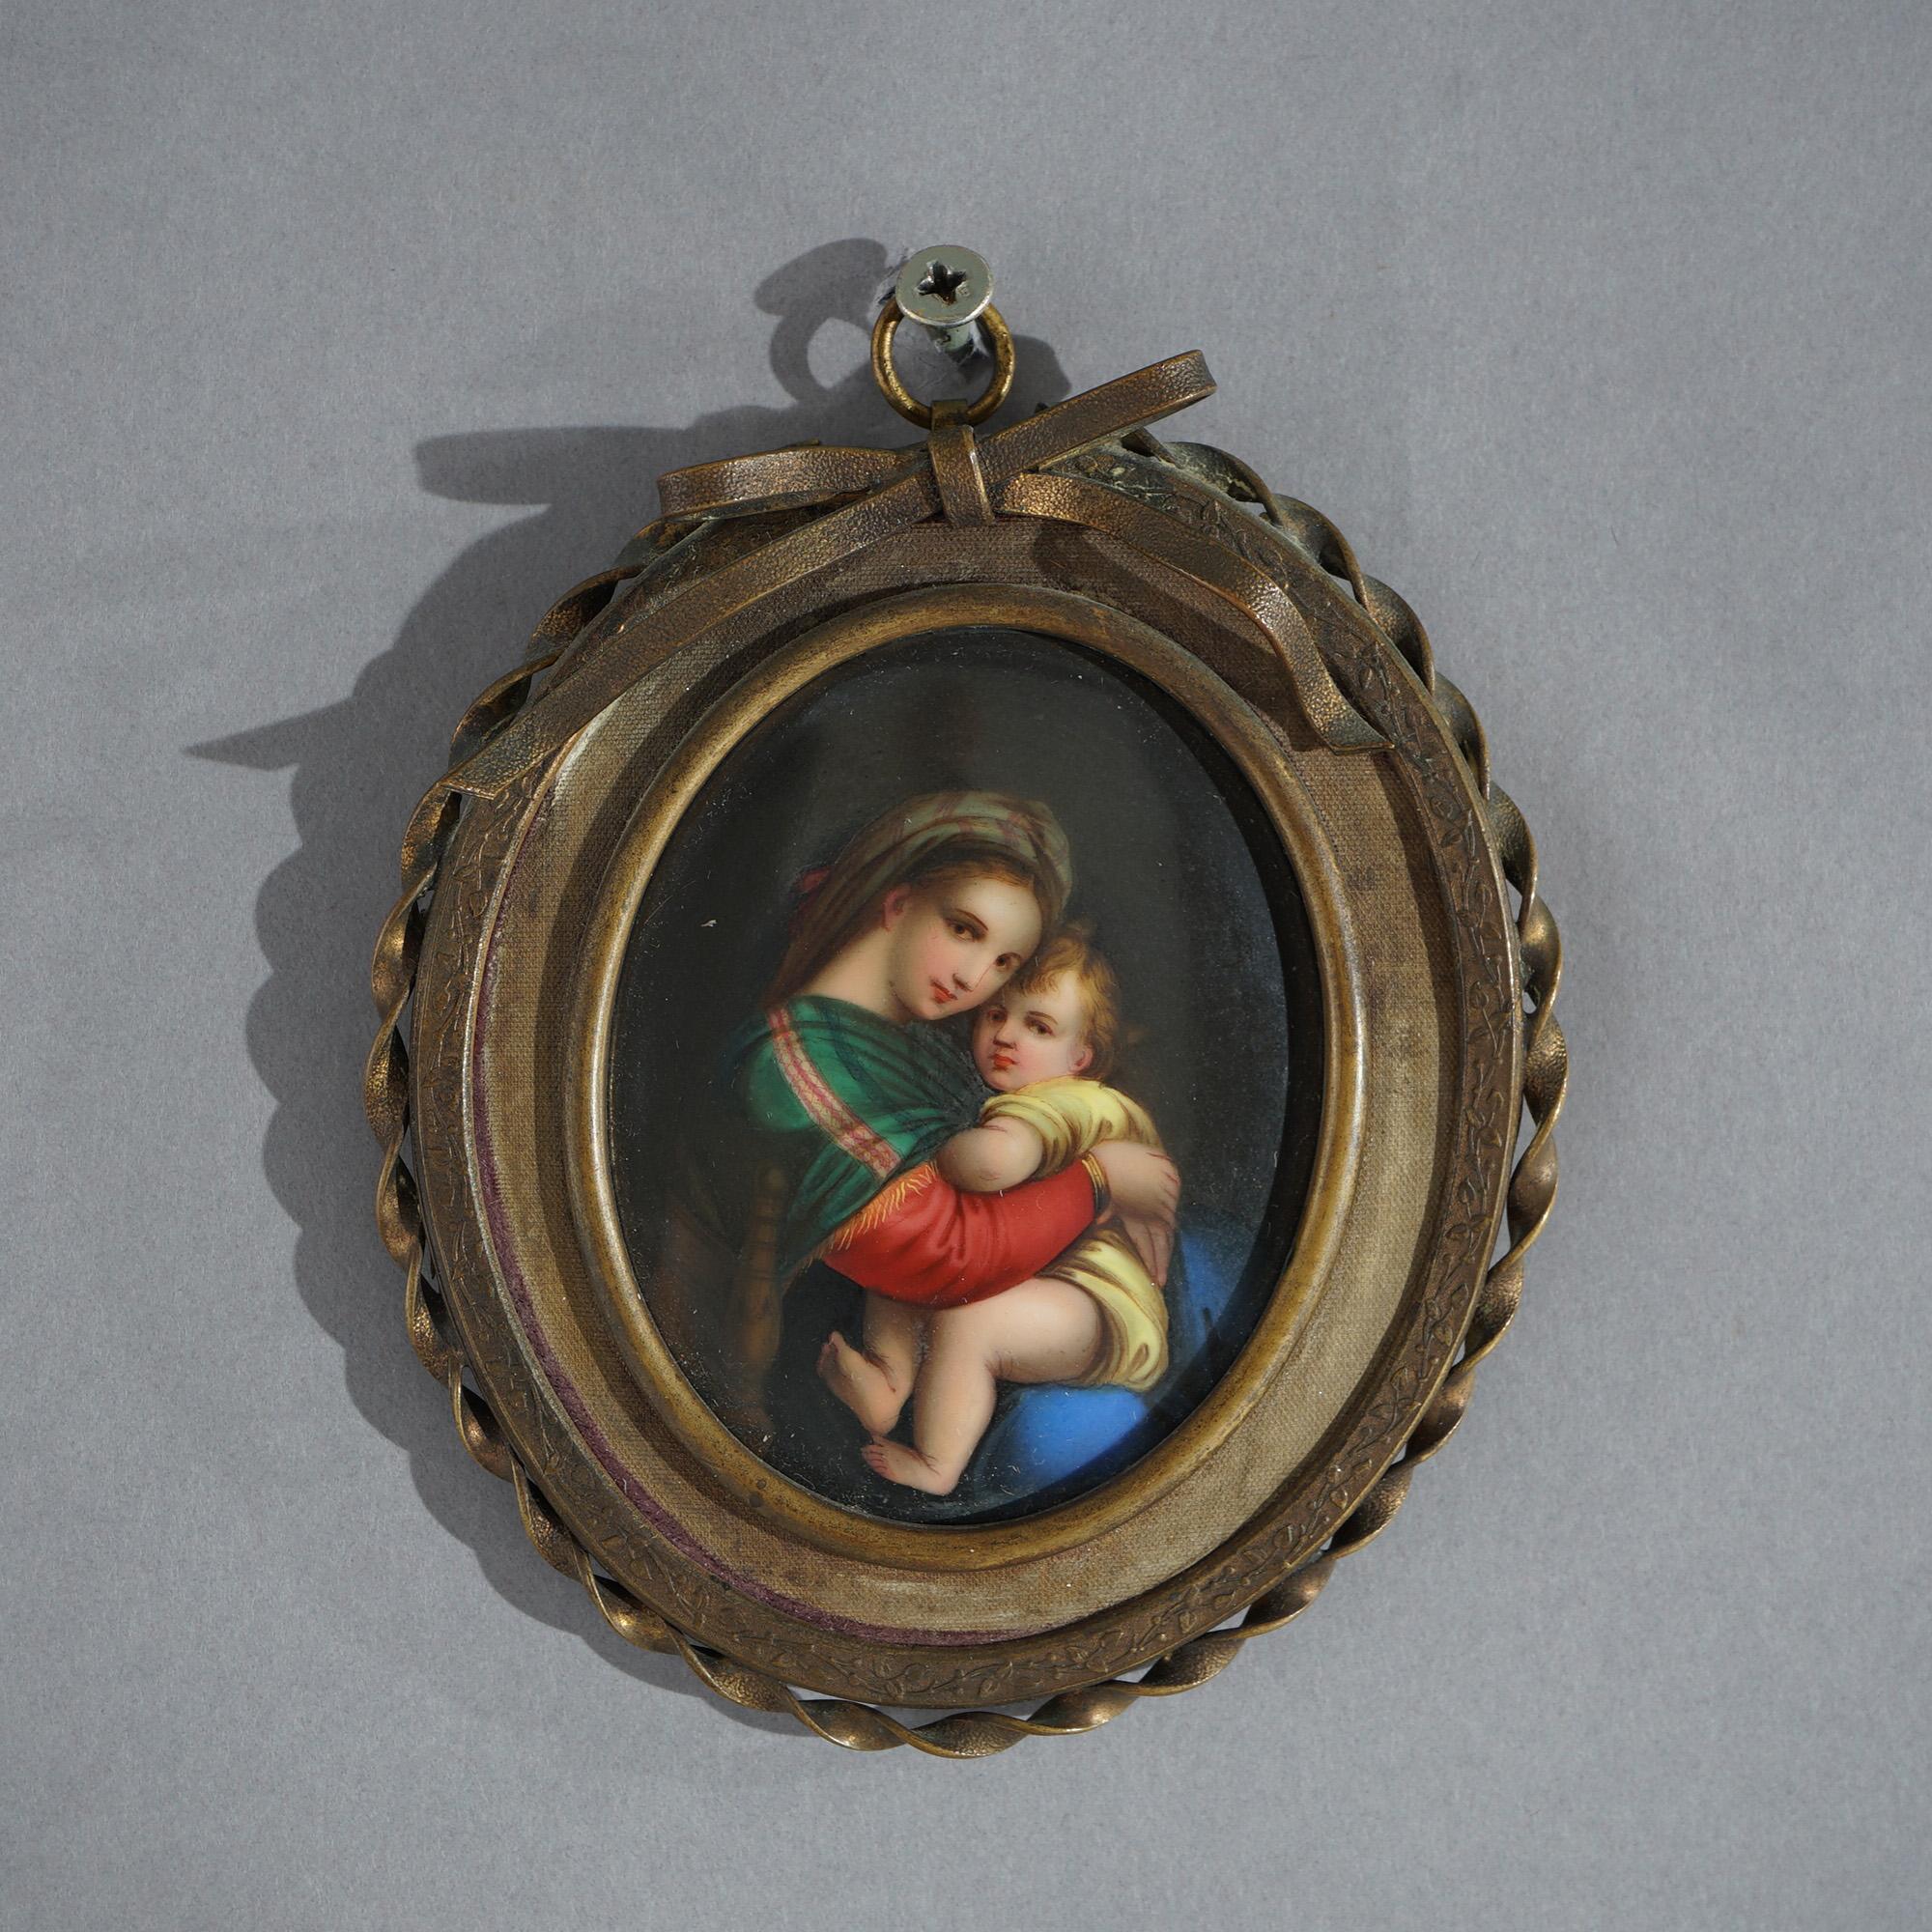 An antique painting on porcelain of The Madonna And Child after Raphael, seated in cast brass ribbon form frame, 19th century

Measures - 5